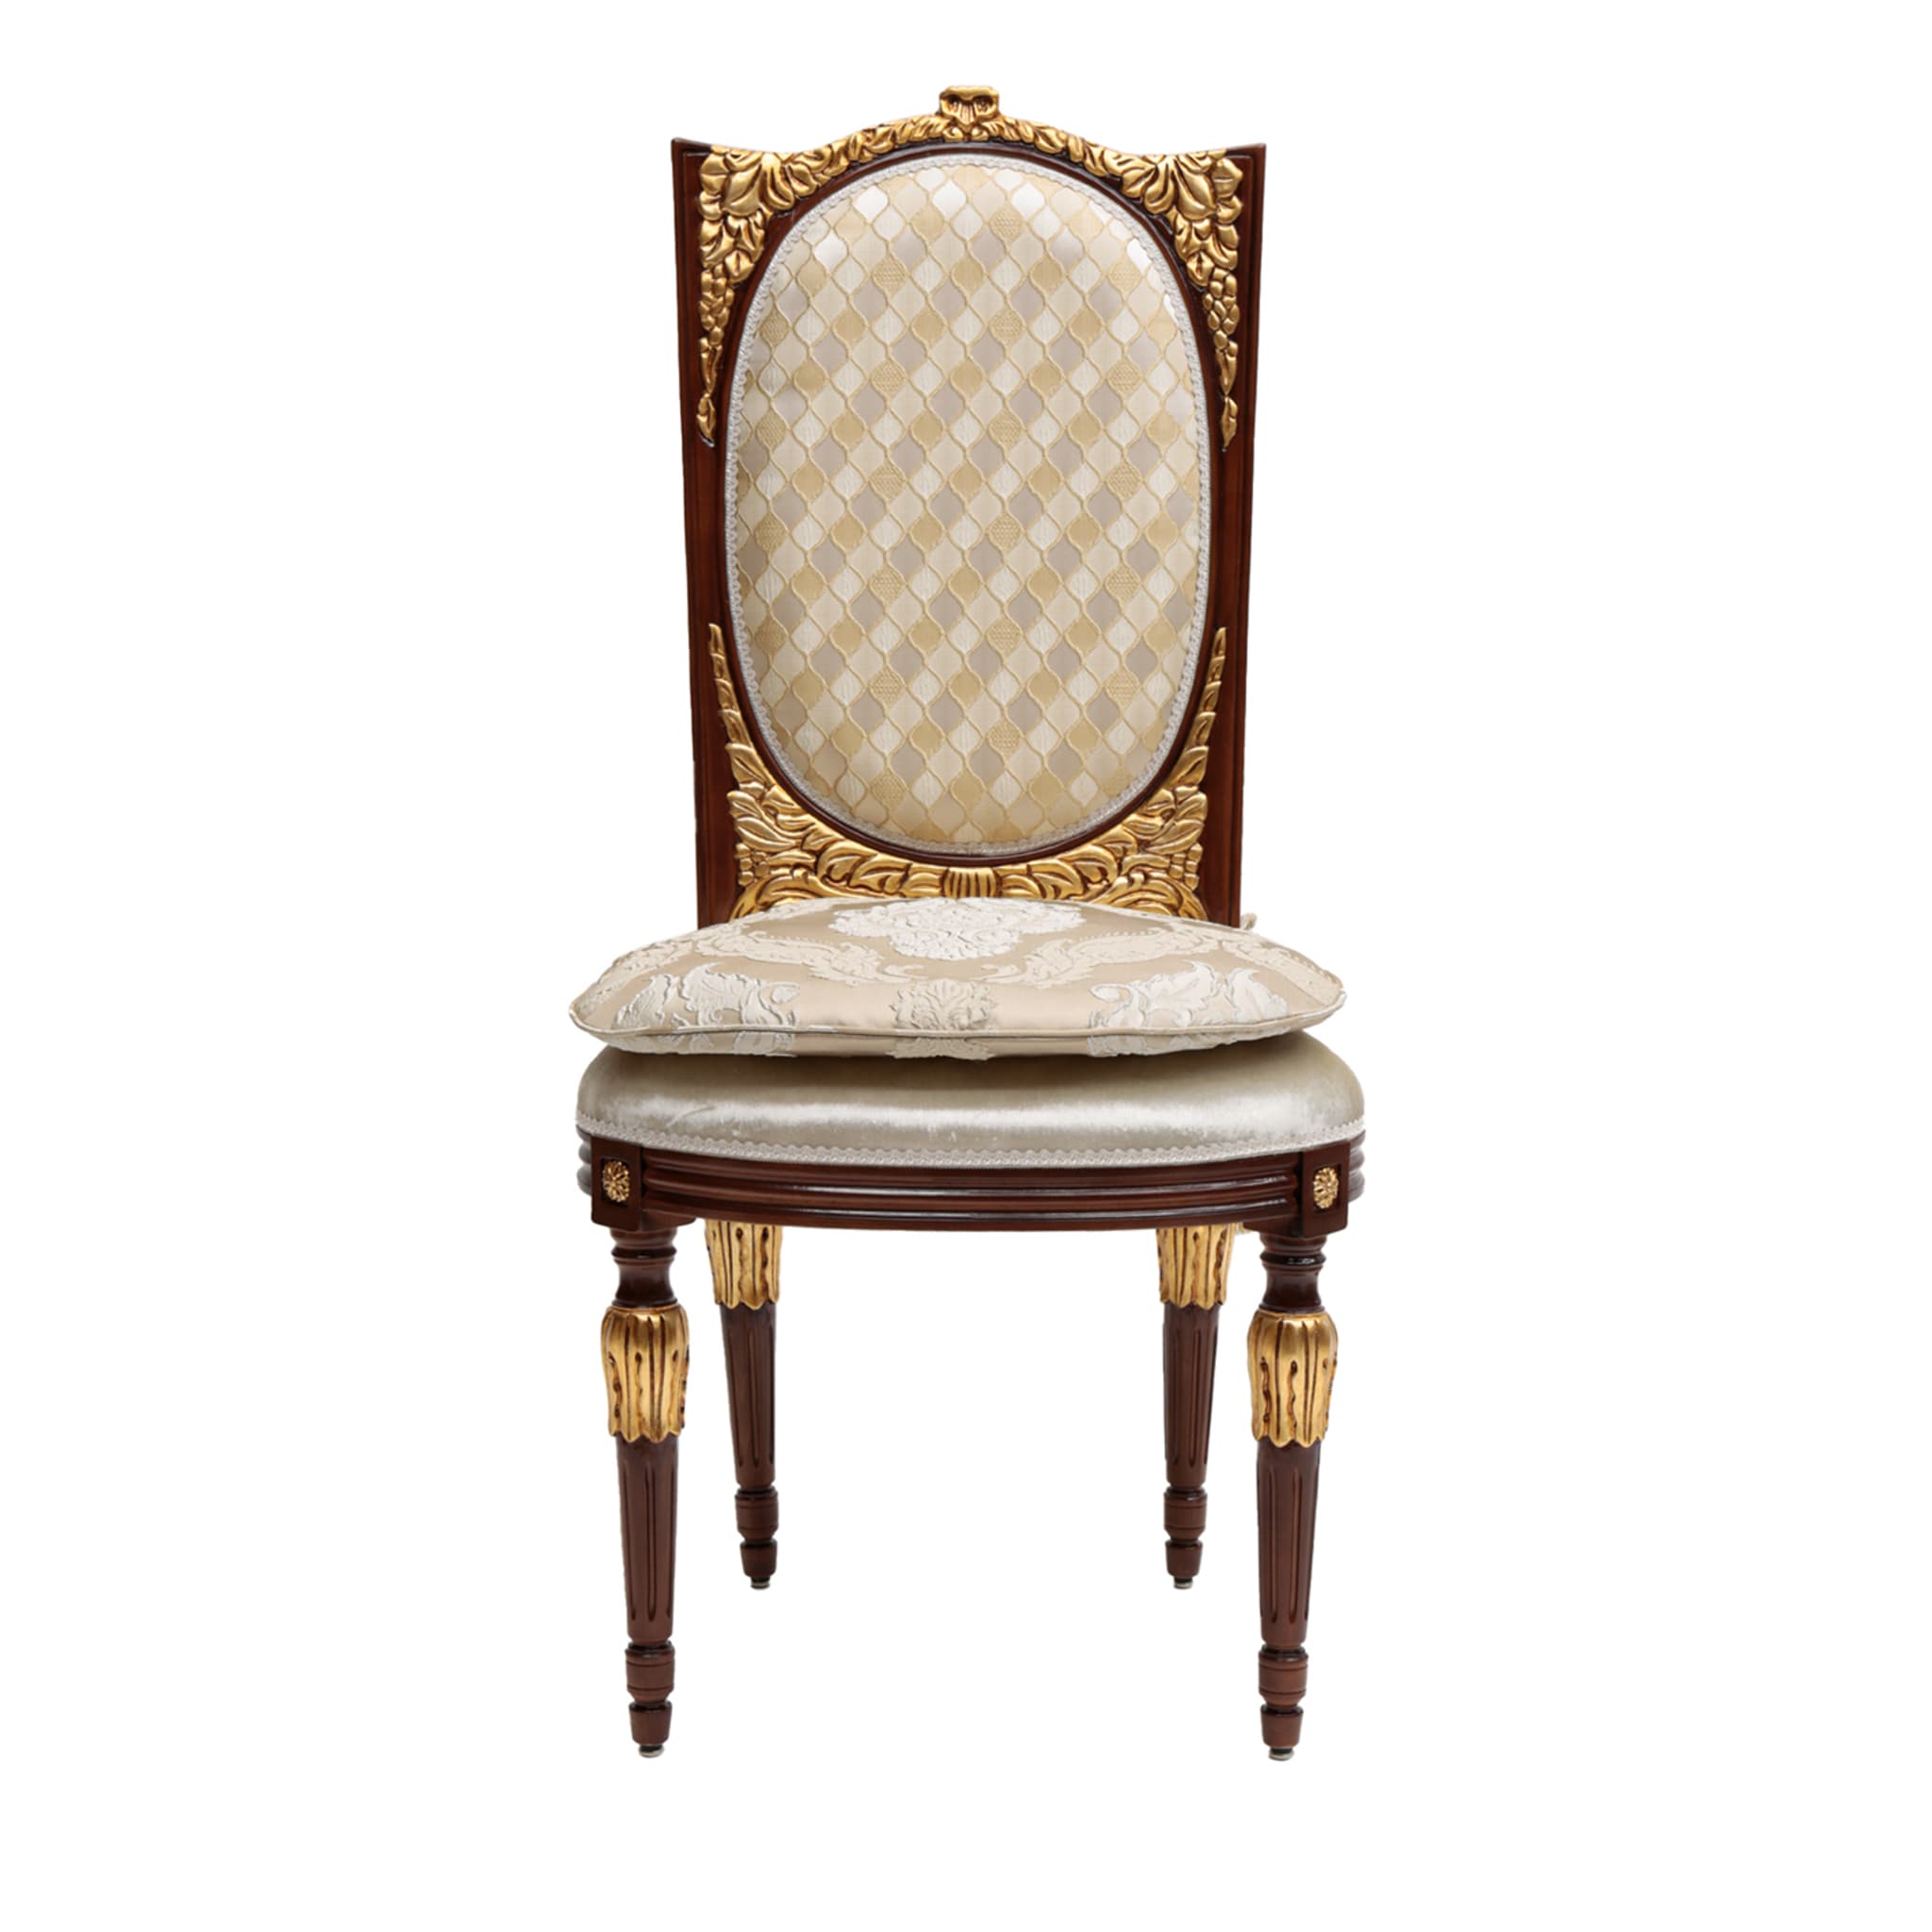 Upholstered Chair with Silver Inlays - Main view